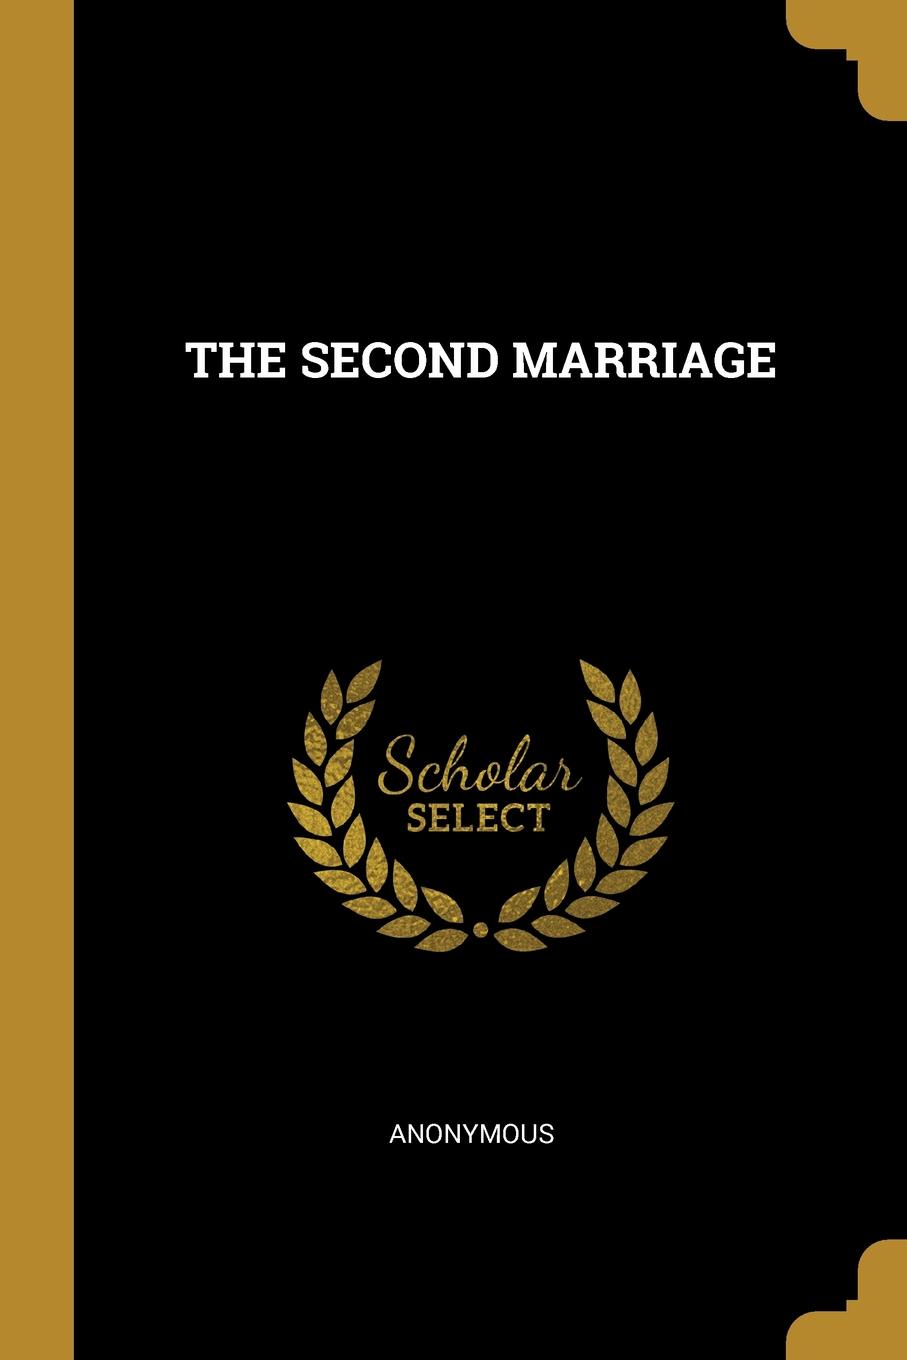 The Second Marriage Telegraph